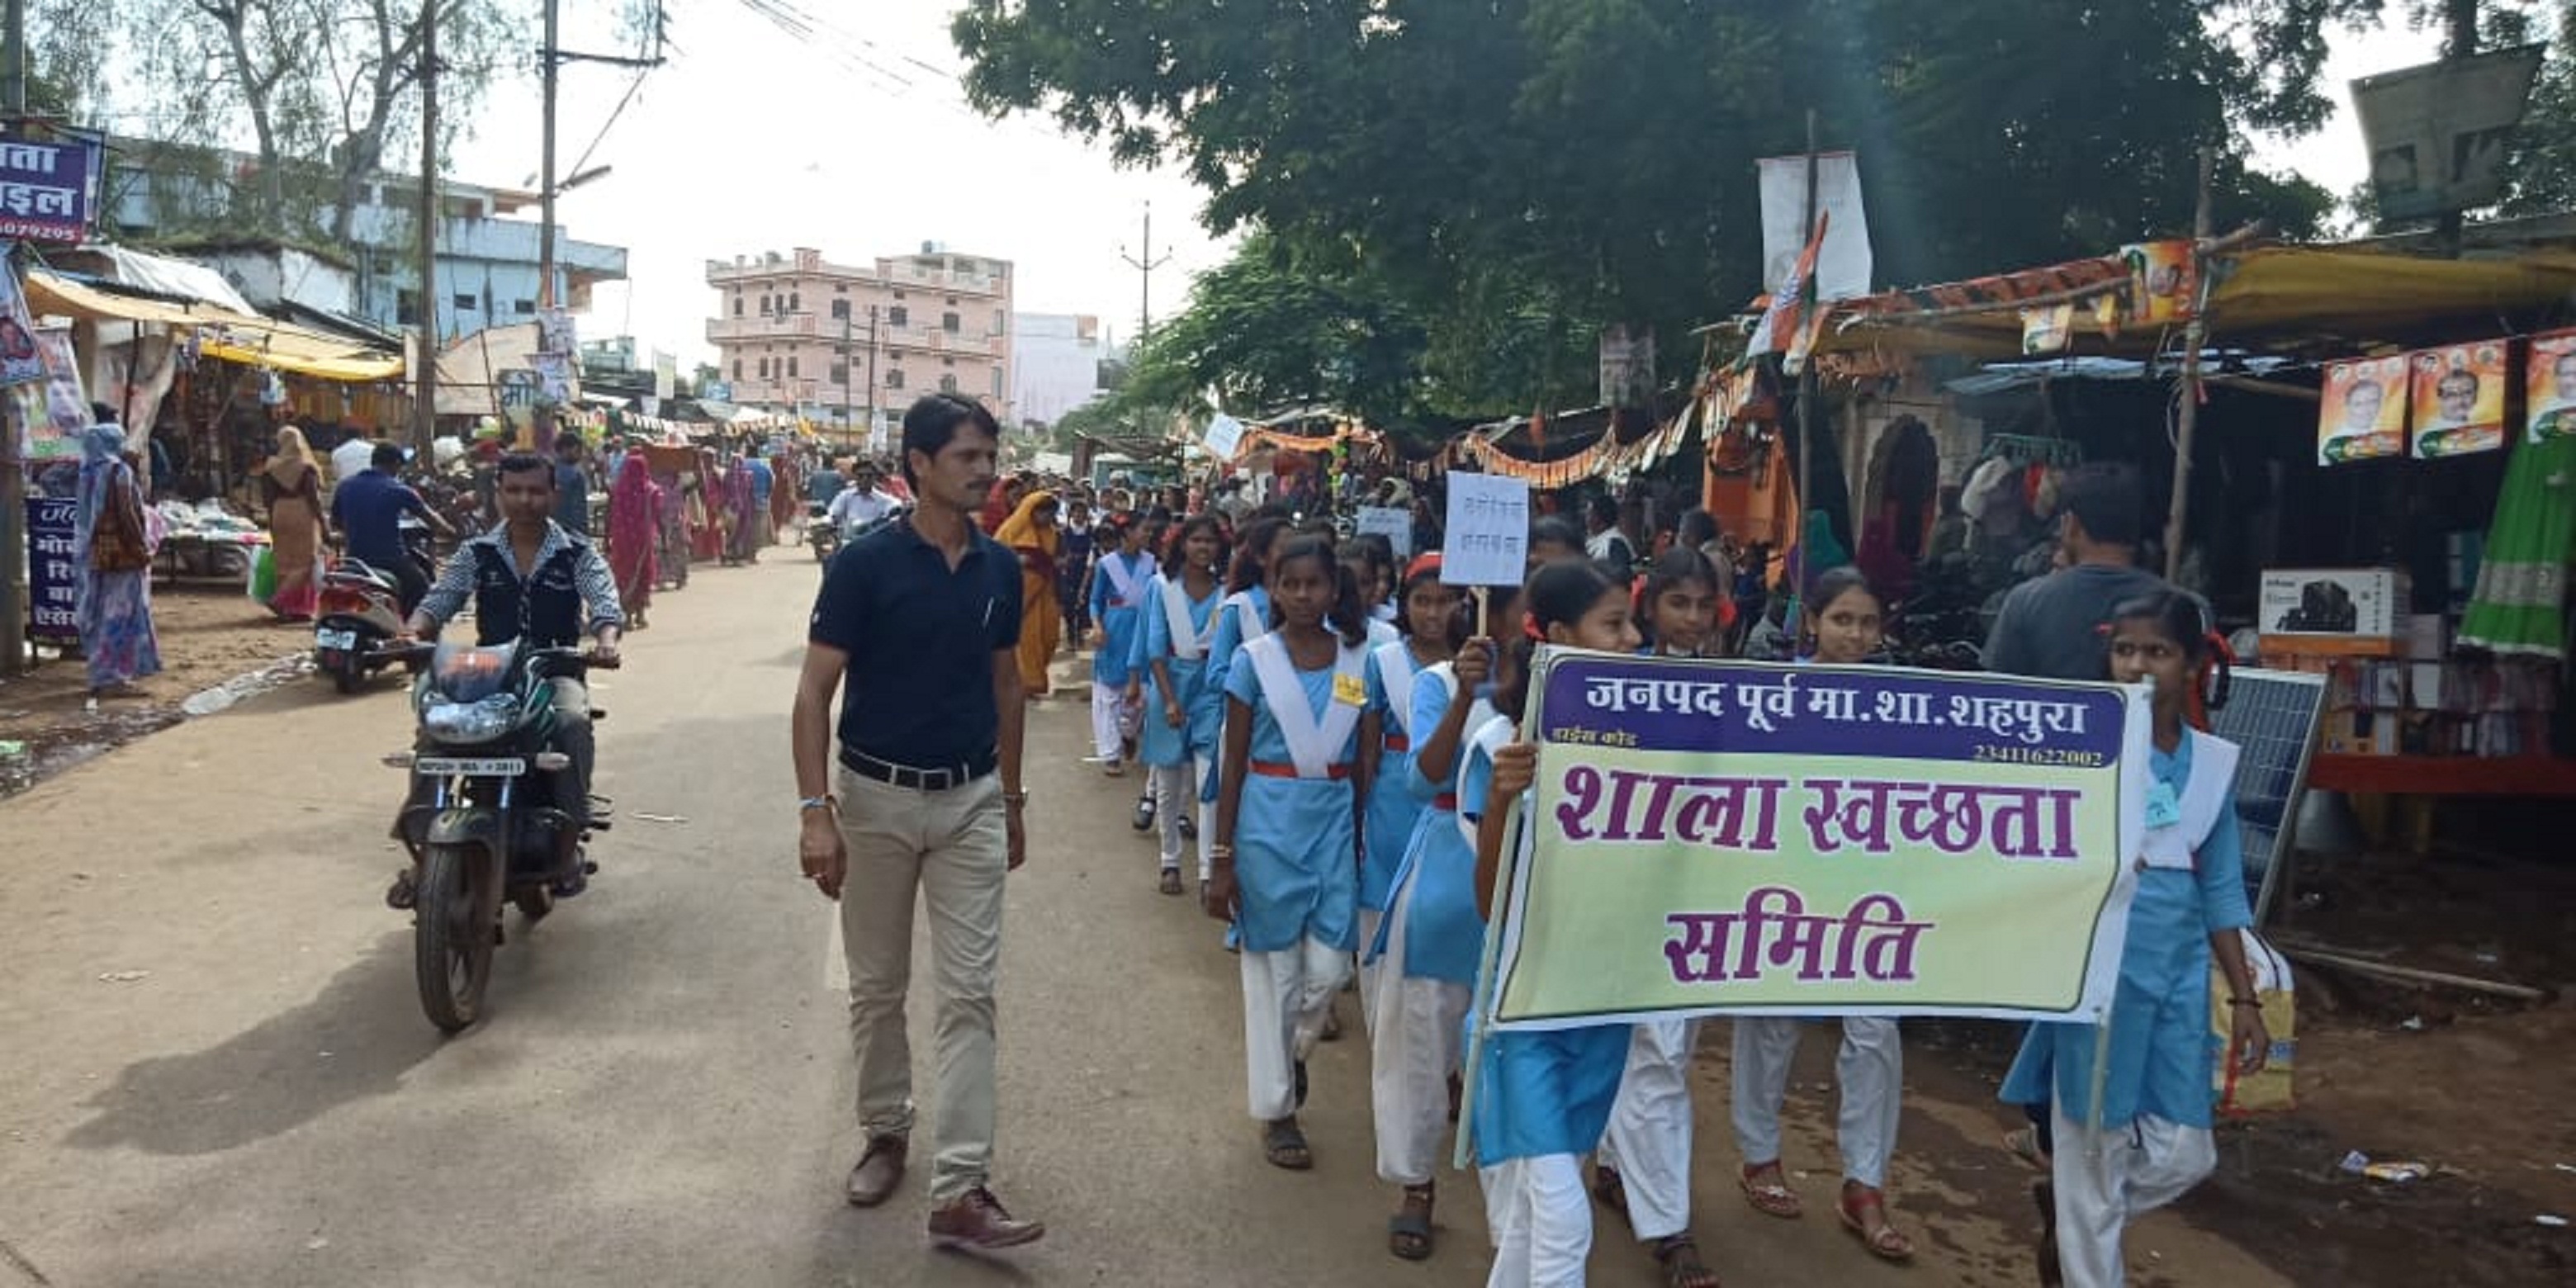 Rally fired cleanliness message